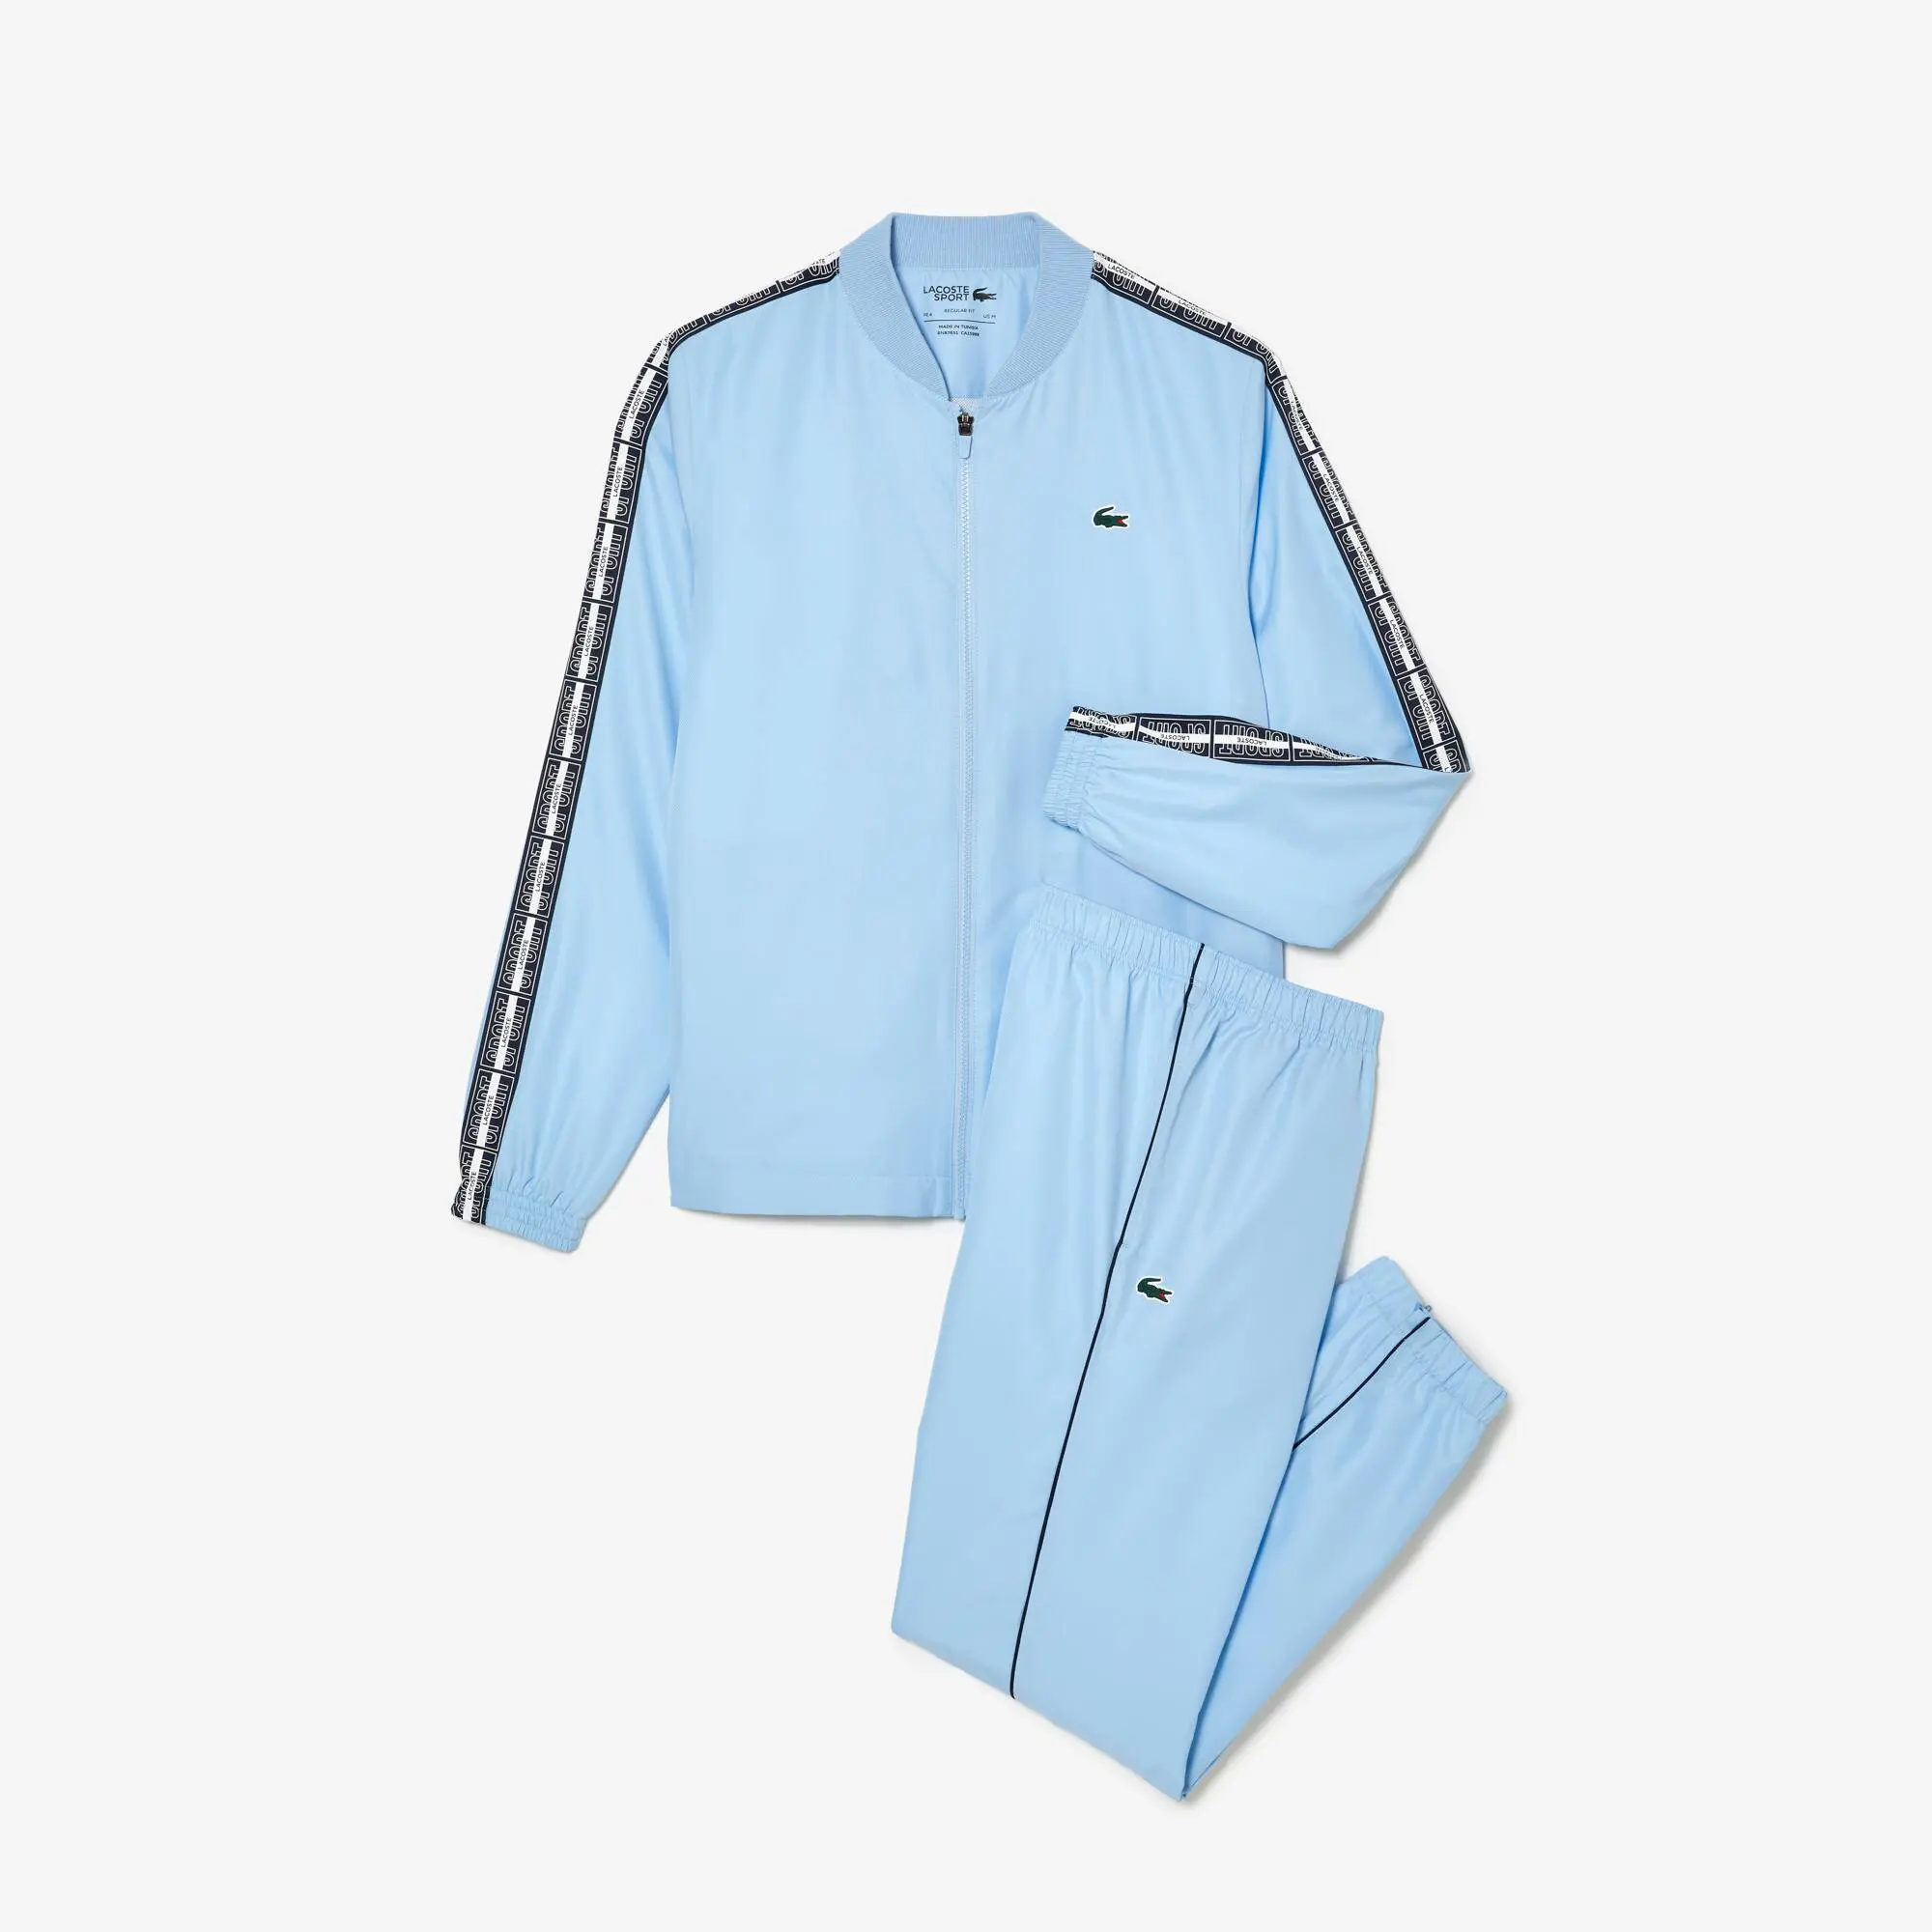 Lacoste Recycled Fabric Tennis Tracksuit. 1